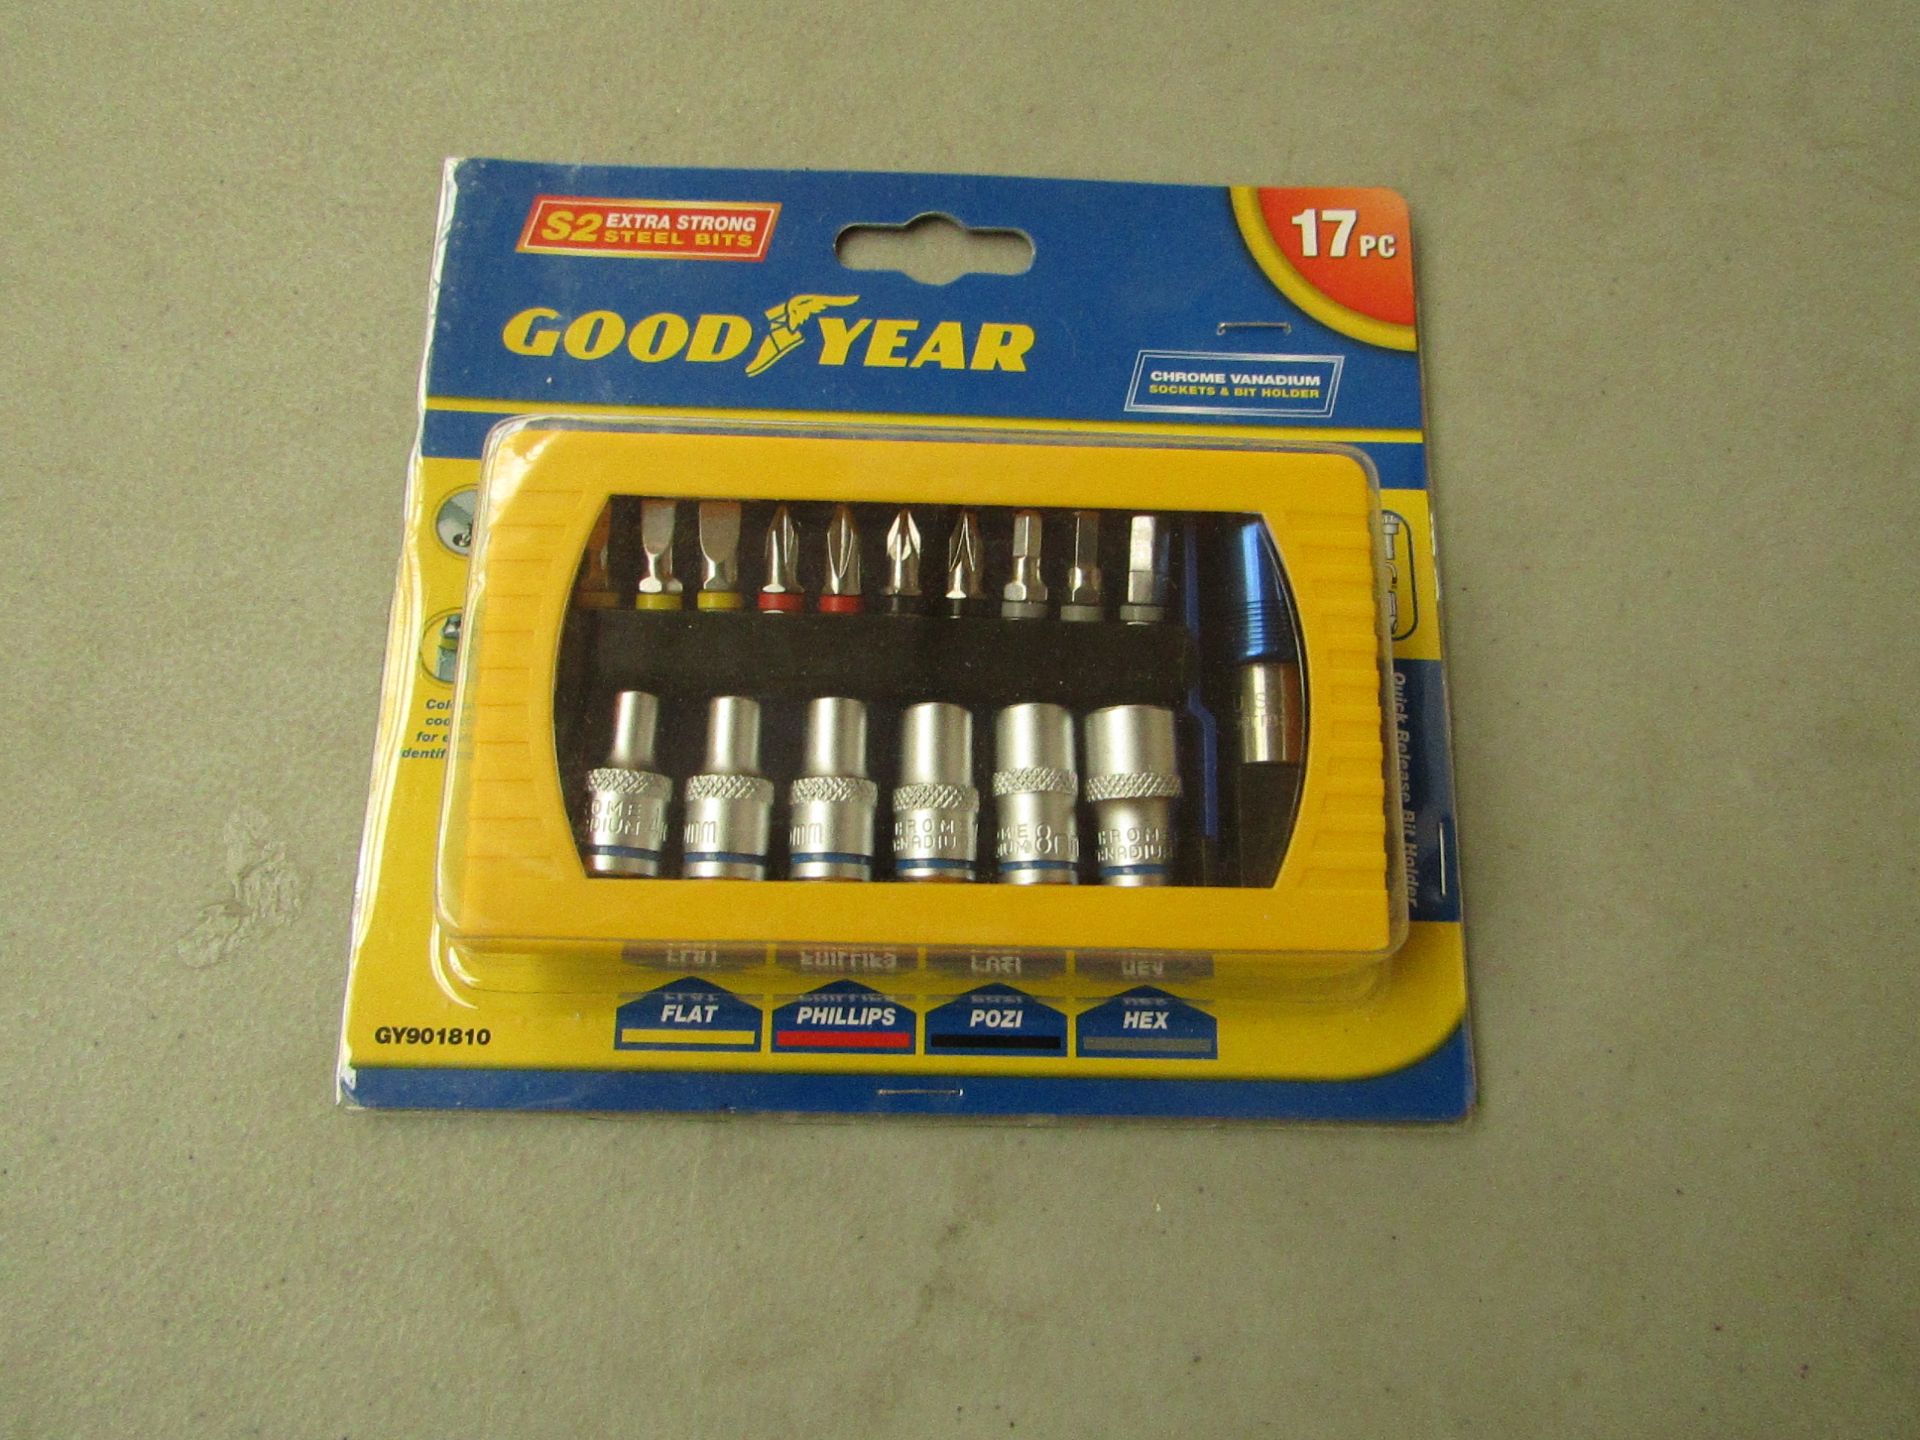 Good Year 17 piece screwdriver bit and socket set, brand new and packaged.